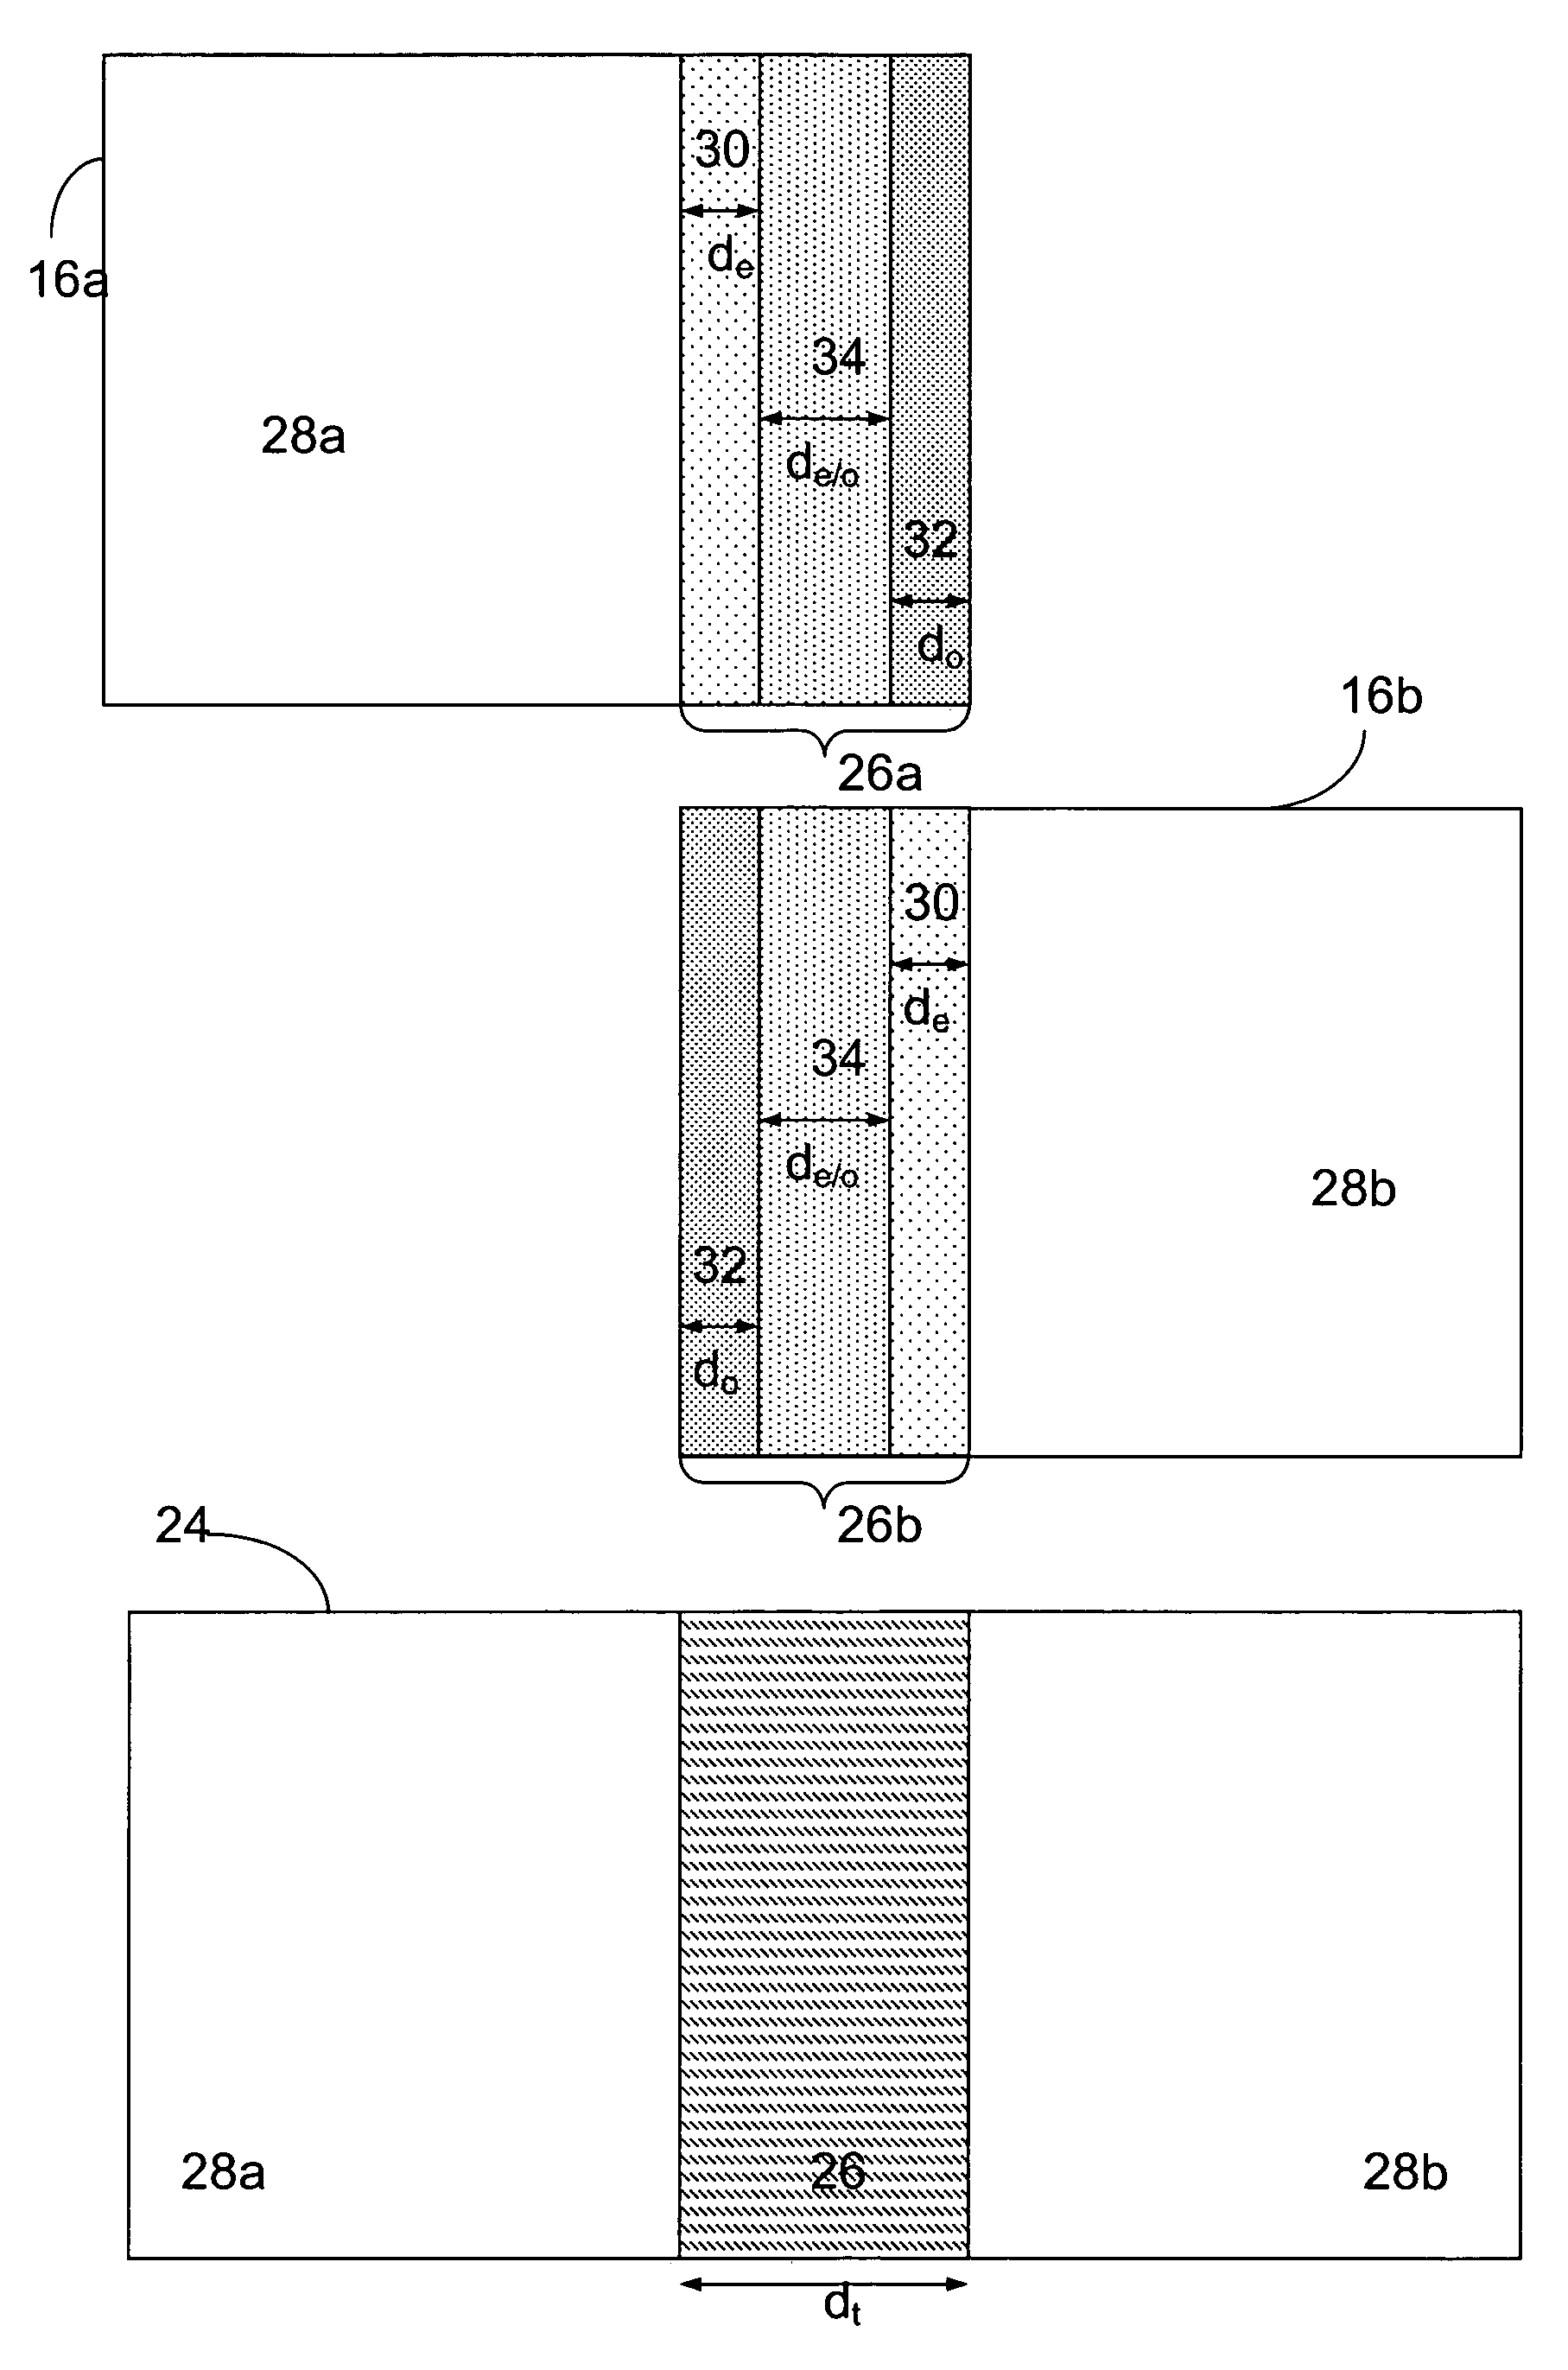 Optical and electrical blending of display images